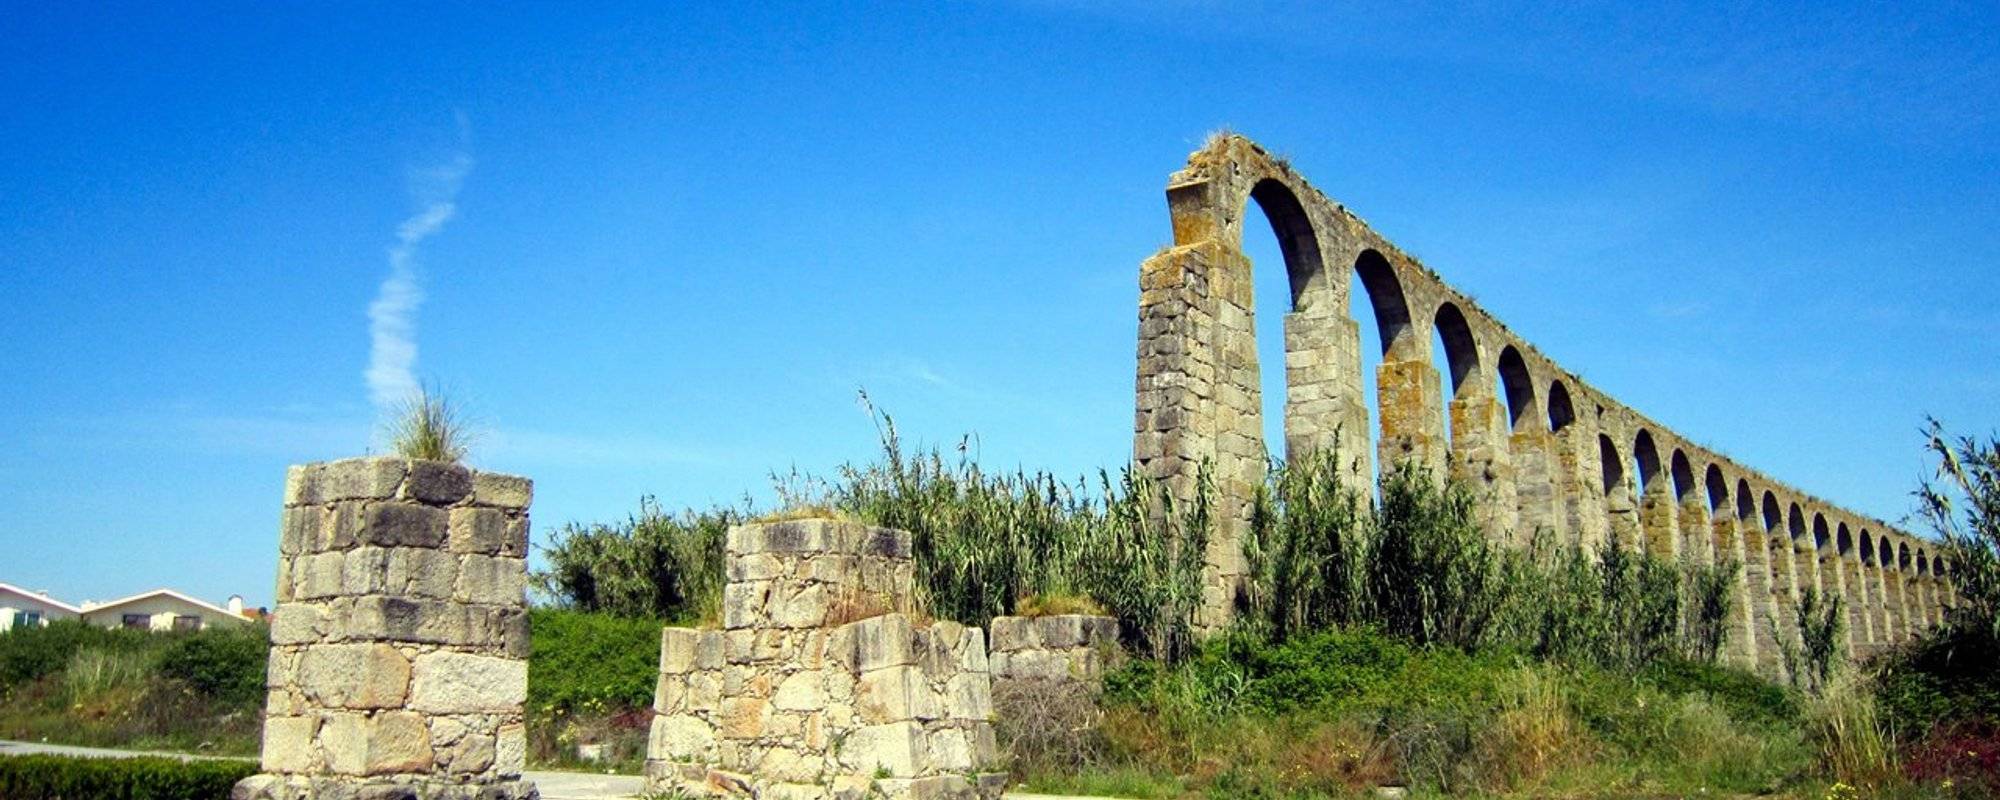 The Old Aqueduct of Vila do Conde